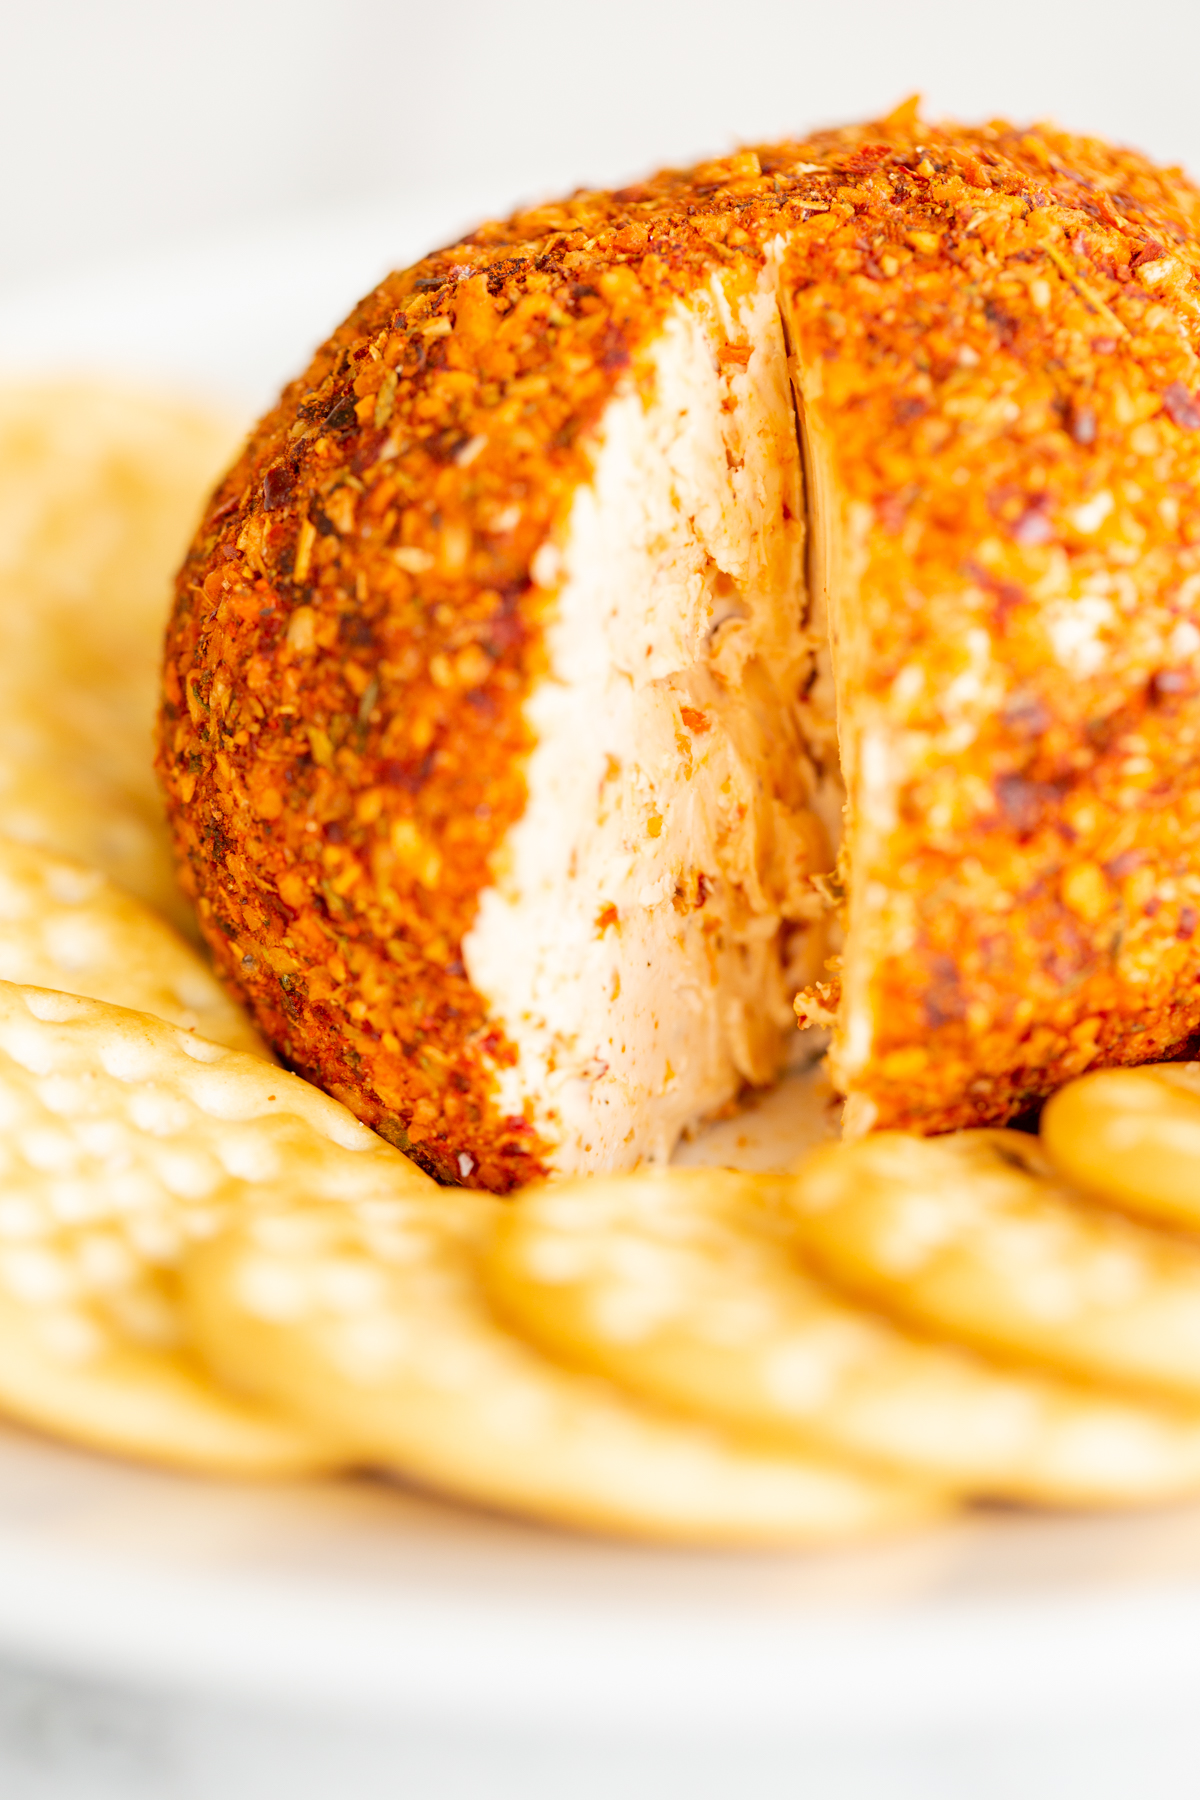 A spicy cheese ball on a white plate surrounded by crackers.